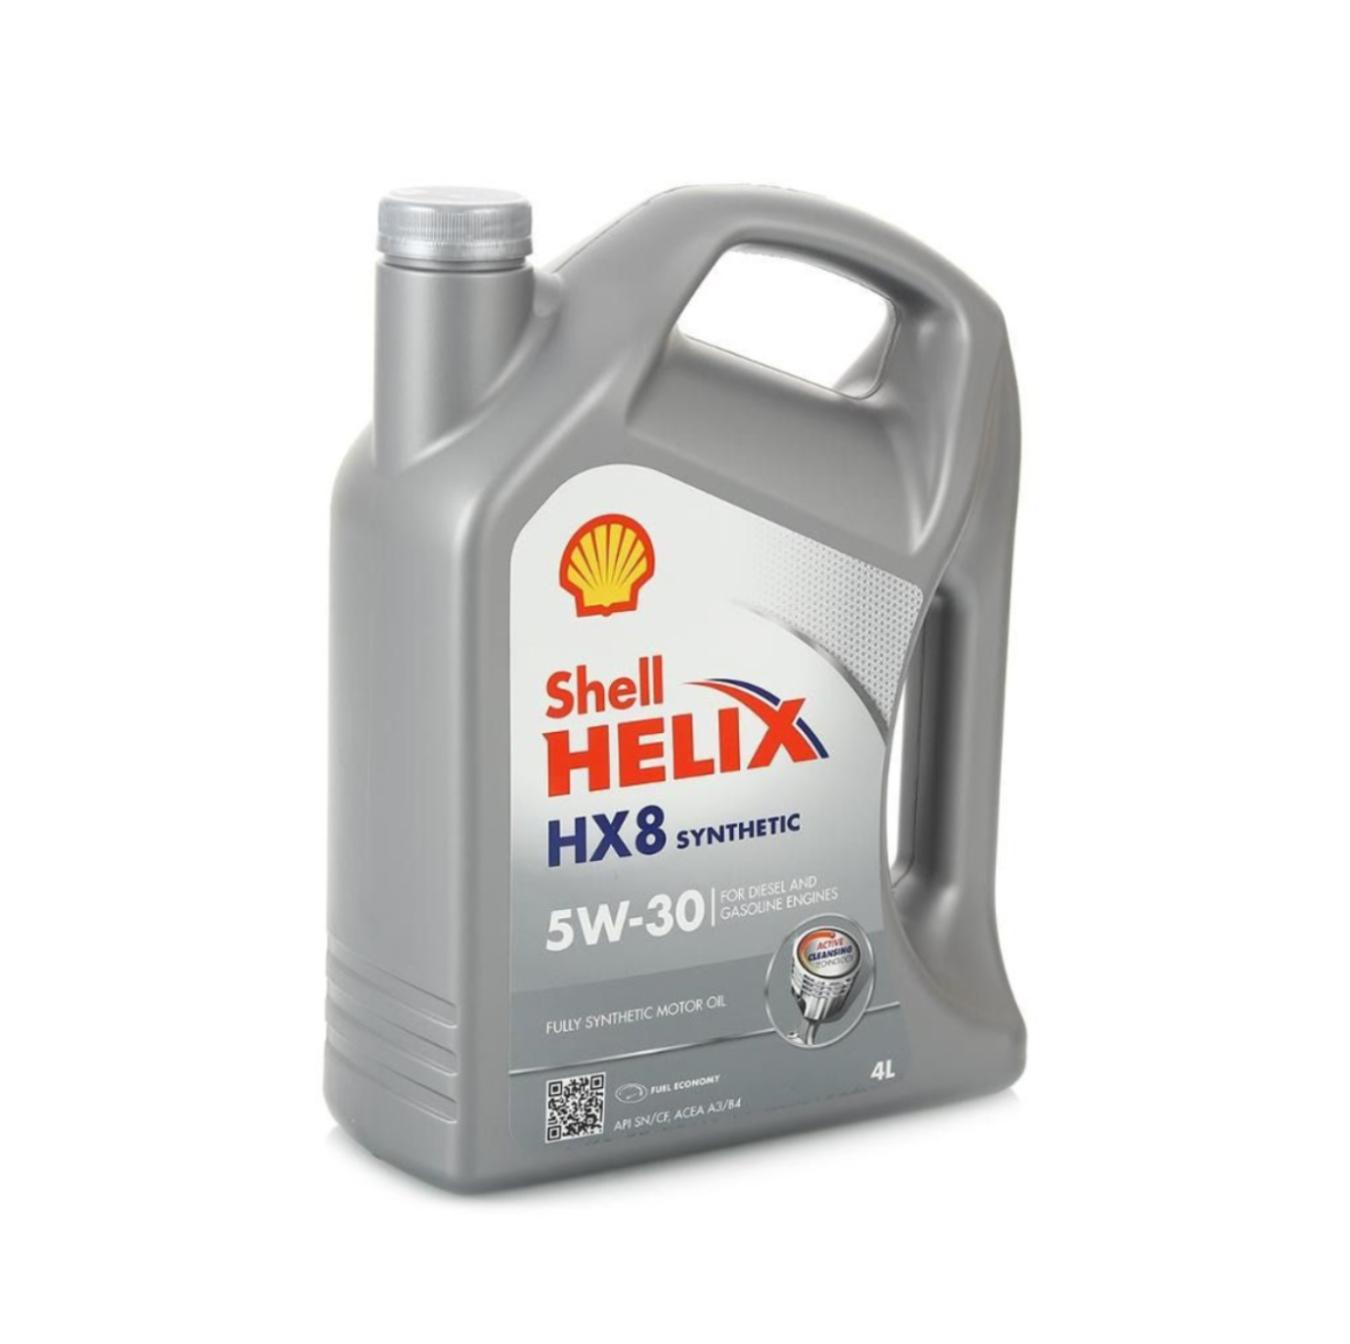 Шкода а5 моторное масло. Shell Helix hx8 Synthetic 5w30. Shell Helix нх8 Synthetic 5w-30. Shell hx8 5w30. Hx8 Synthetic 5w-30 4l.